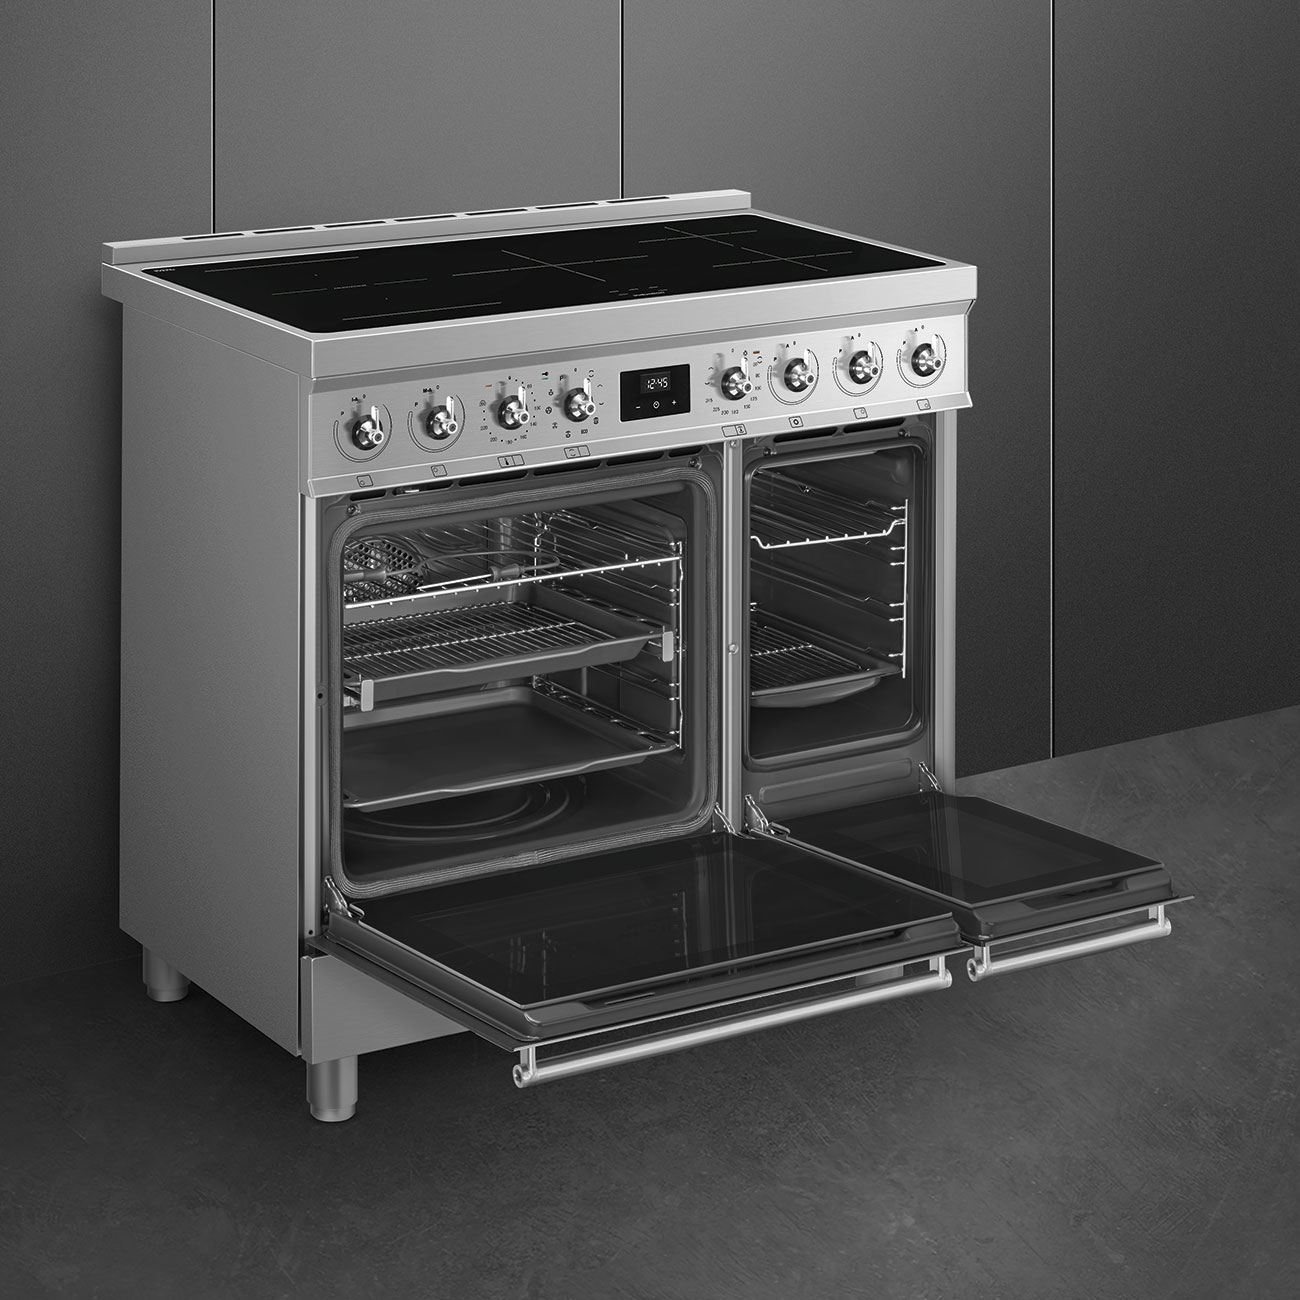 Smeg Stainless steel Cooker with Induction Hob_5